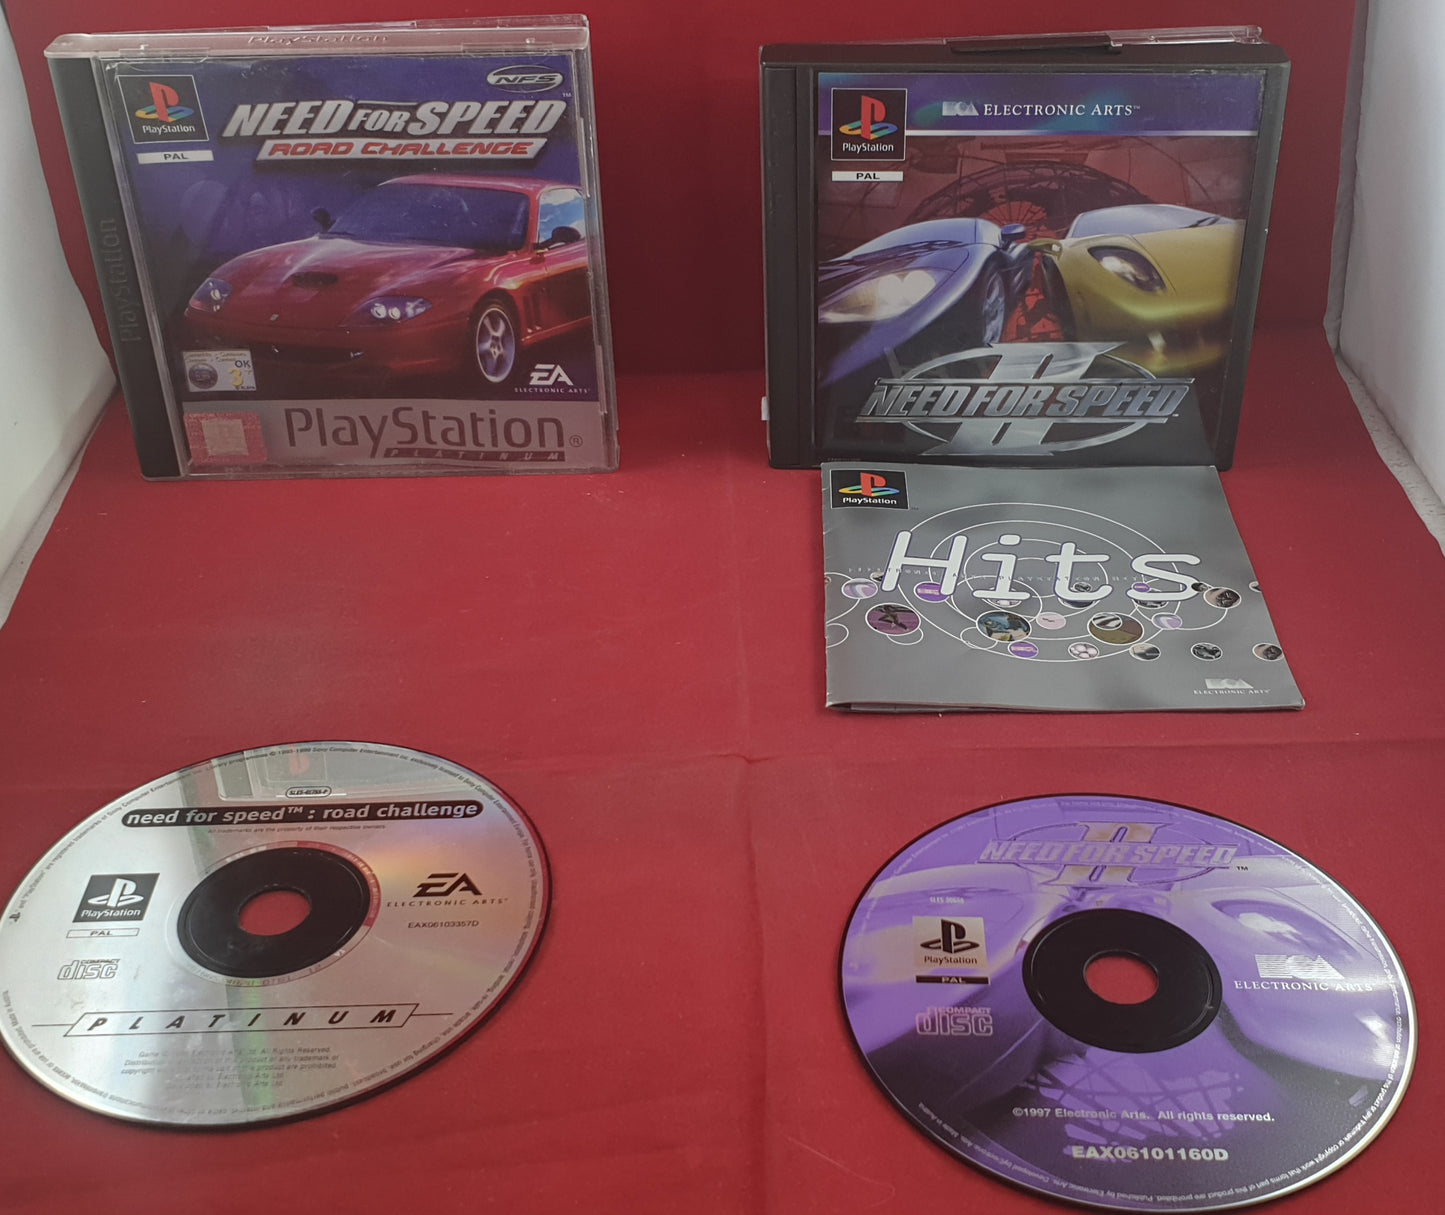 Need for Speed II & Road Challenge Sony Playstation 1 (PS1) Game Bundle